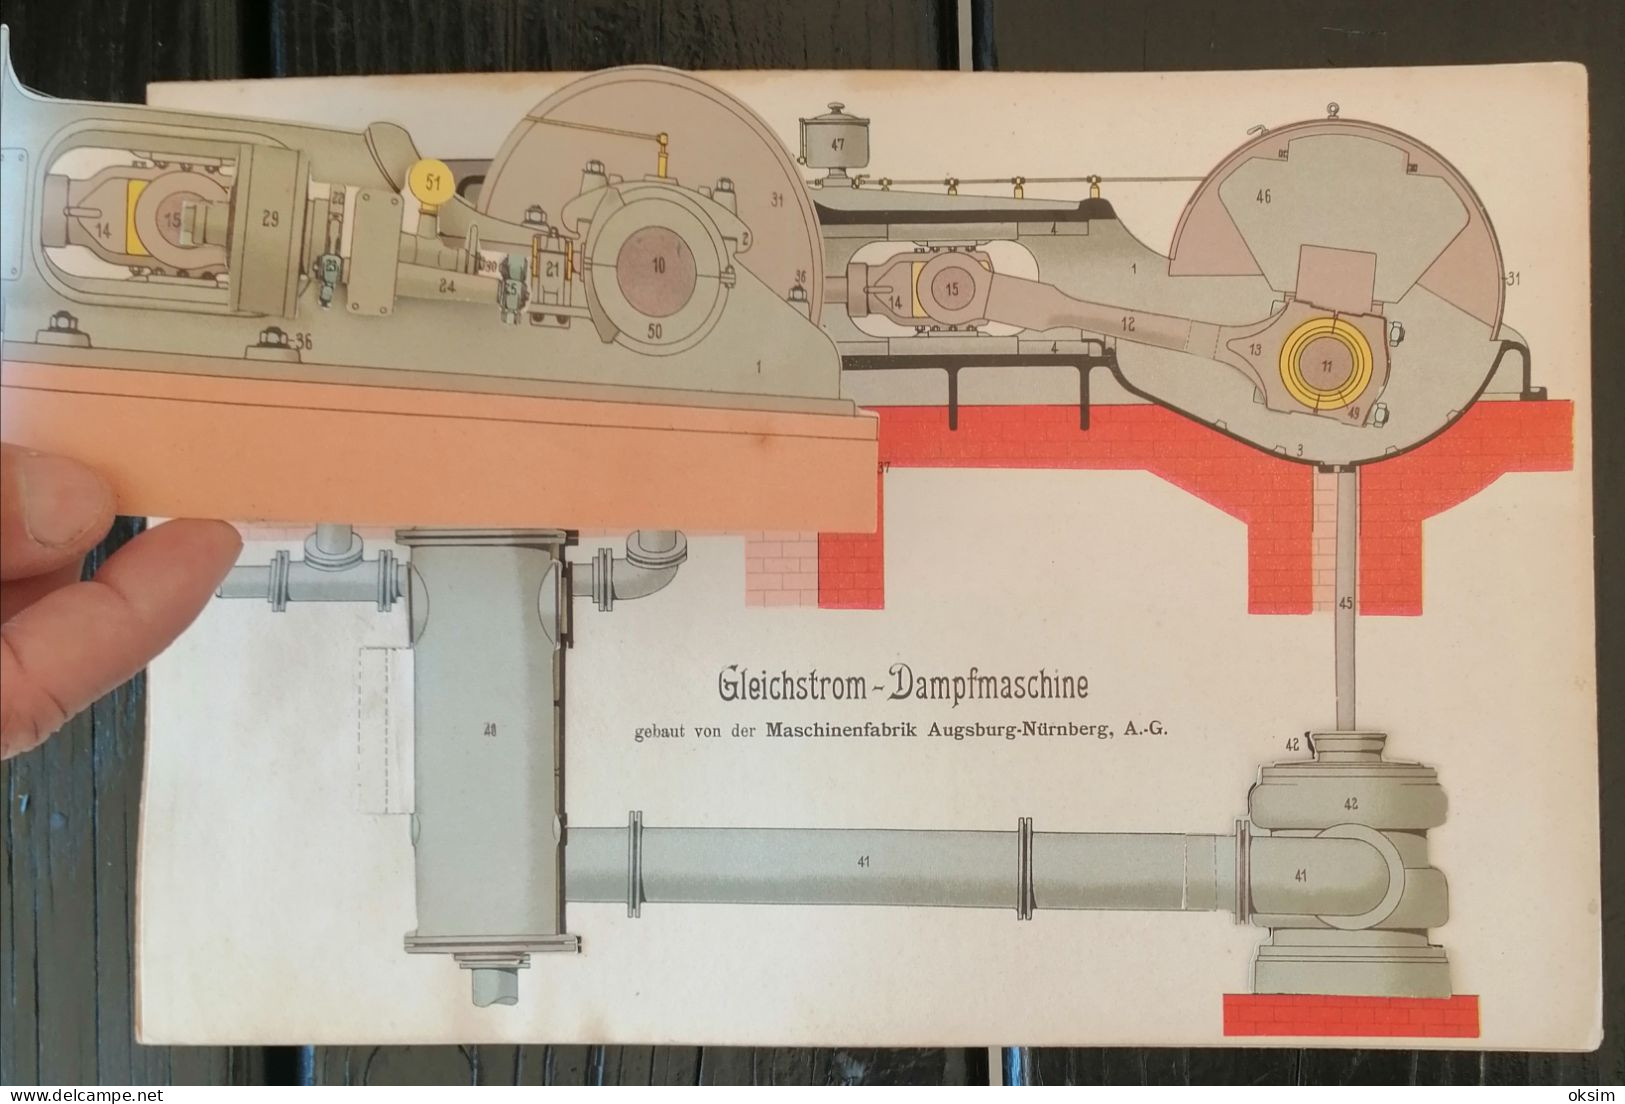 Drawings of machinery in colour, consisting of several layers that can be unfolded to show the interior of the machines